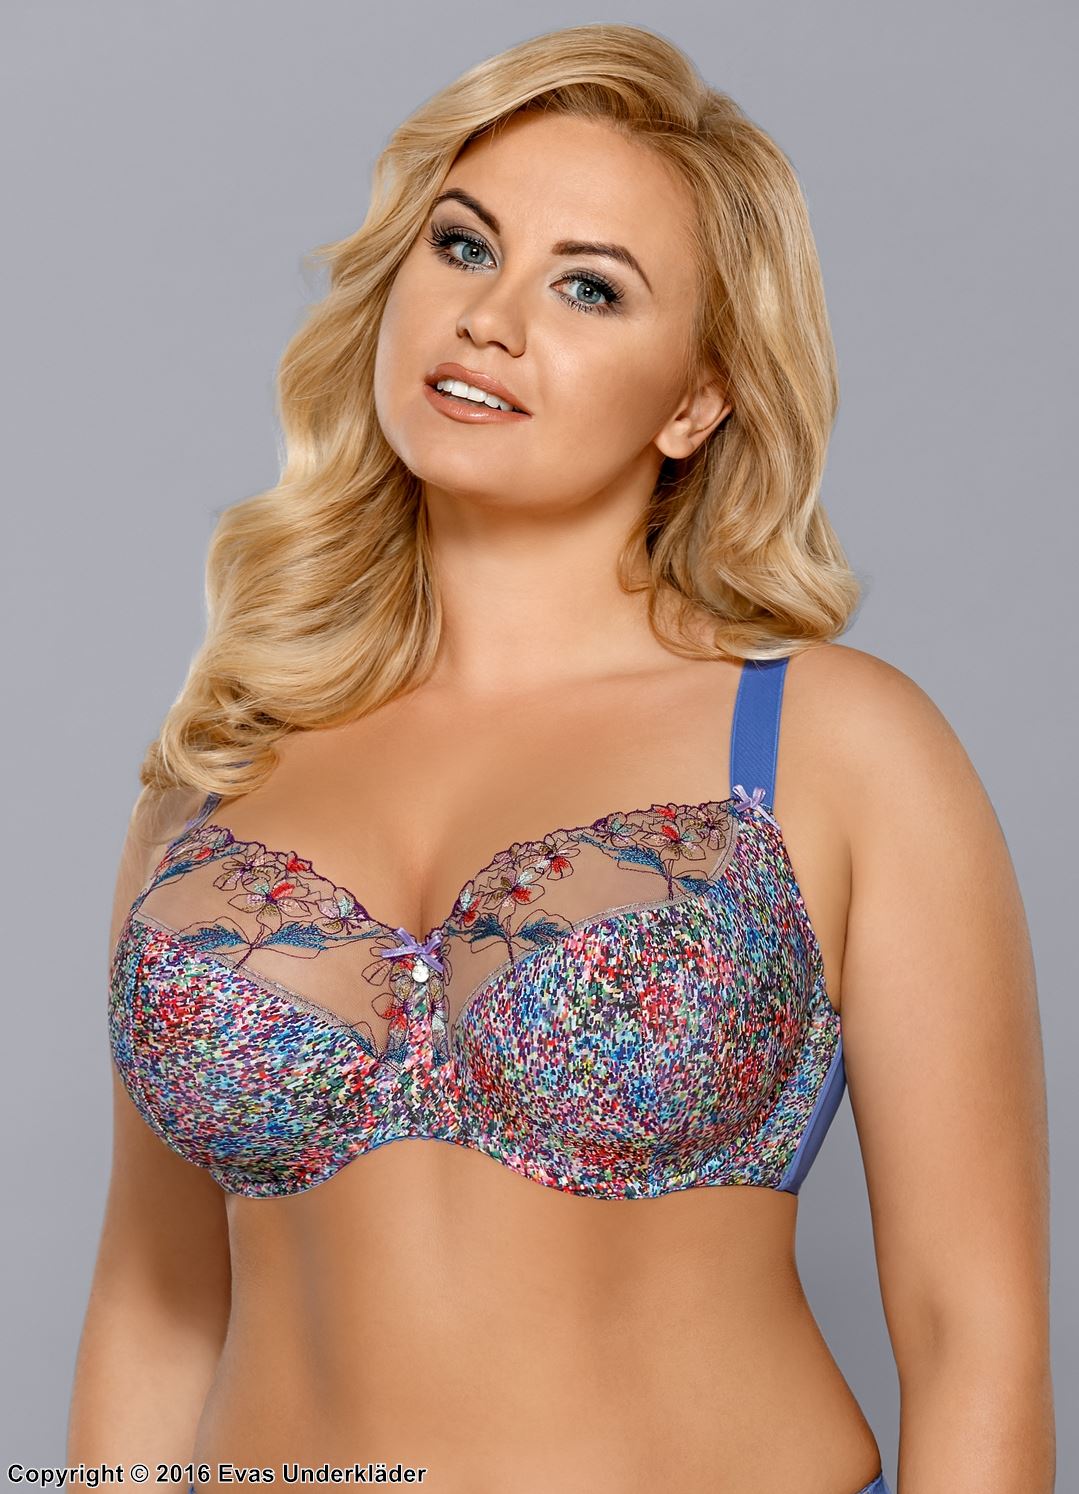 Exclusive bra, embroidery, mesh inlay, paisley, B to S-cup